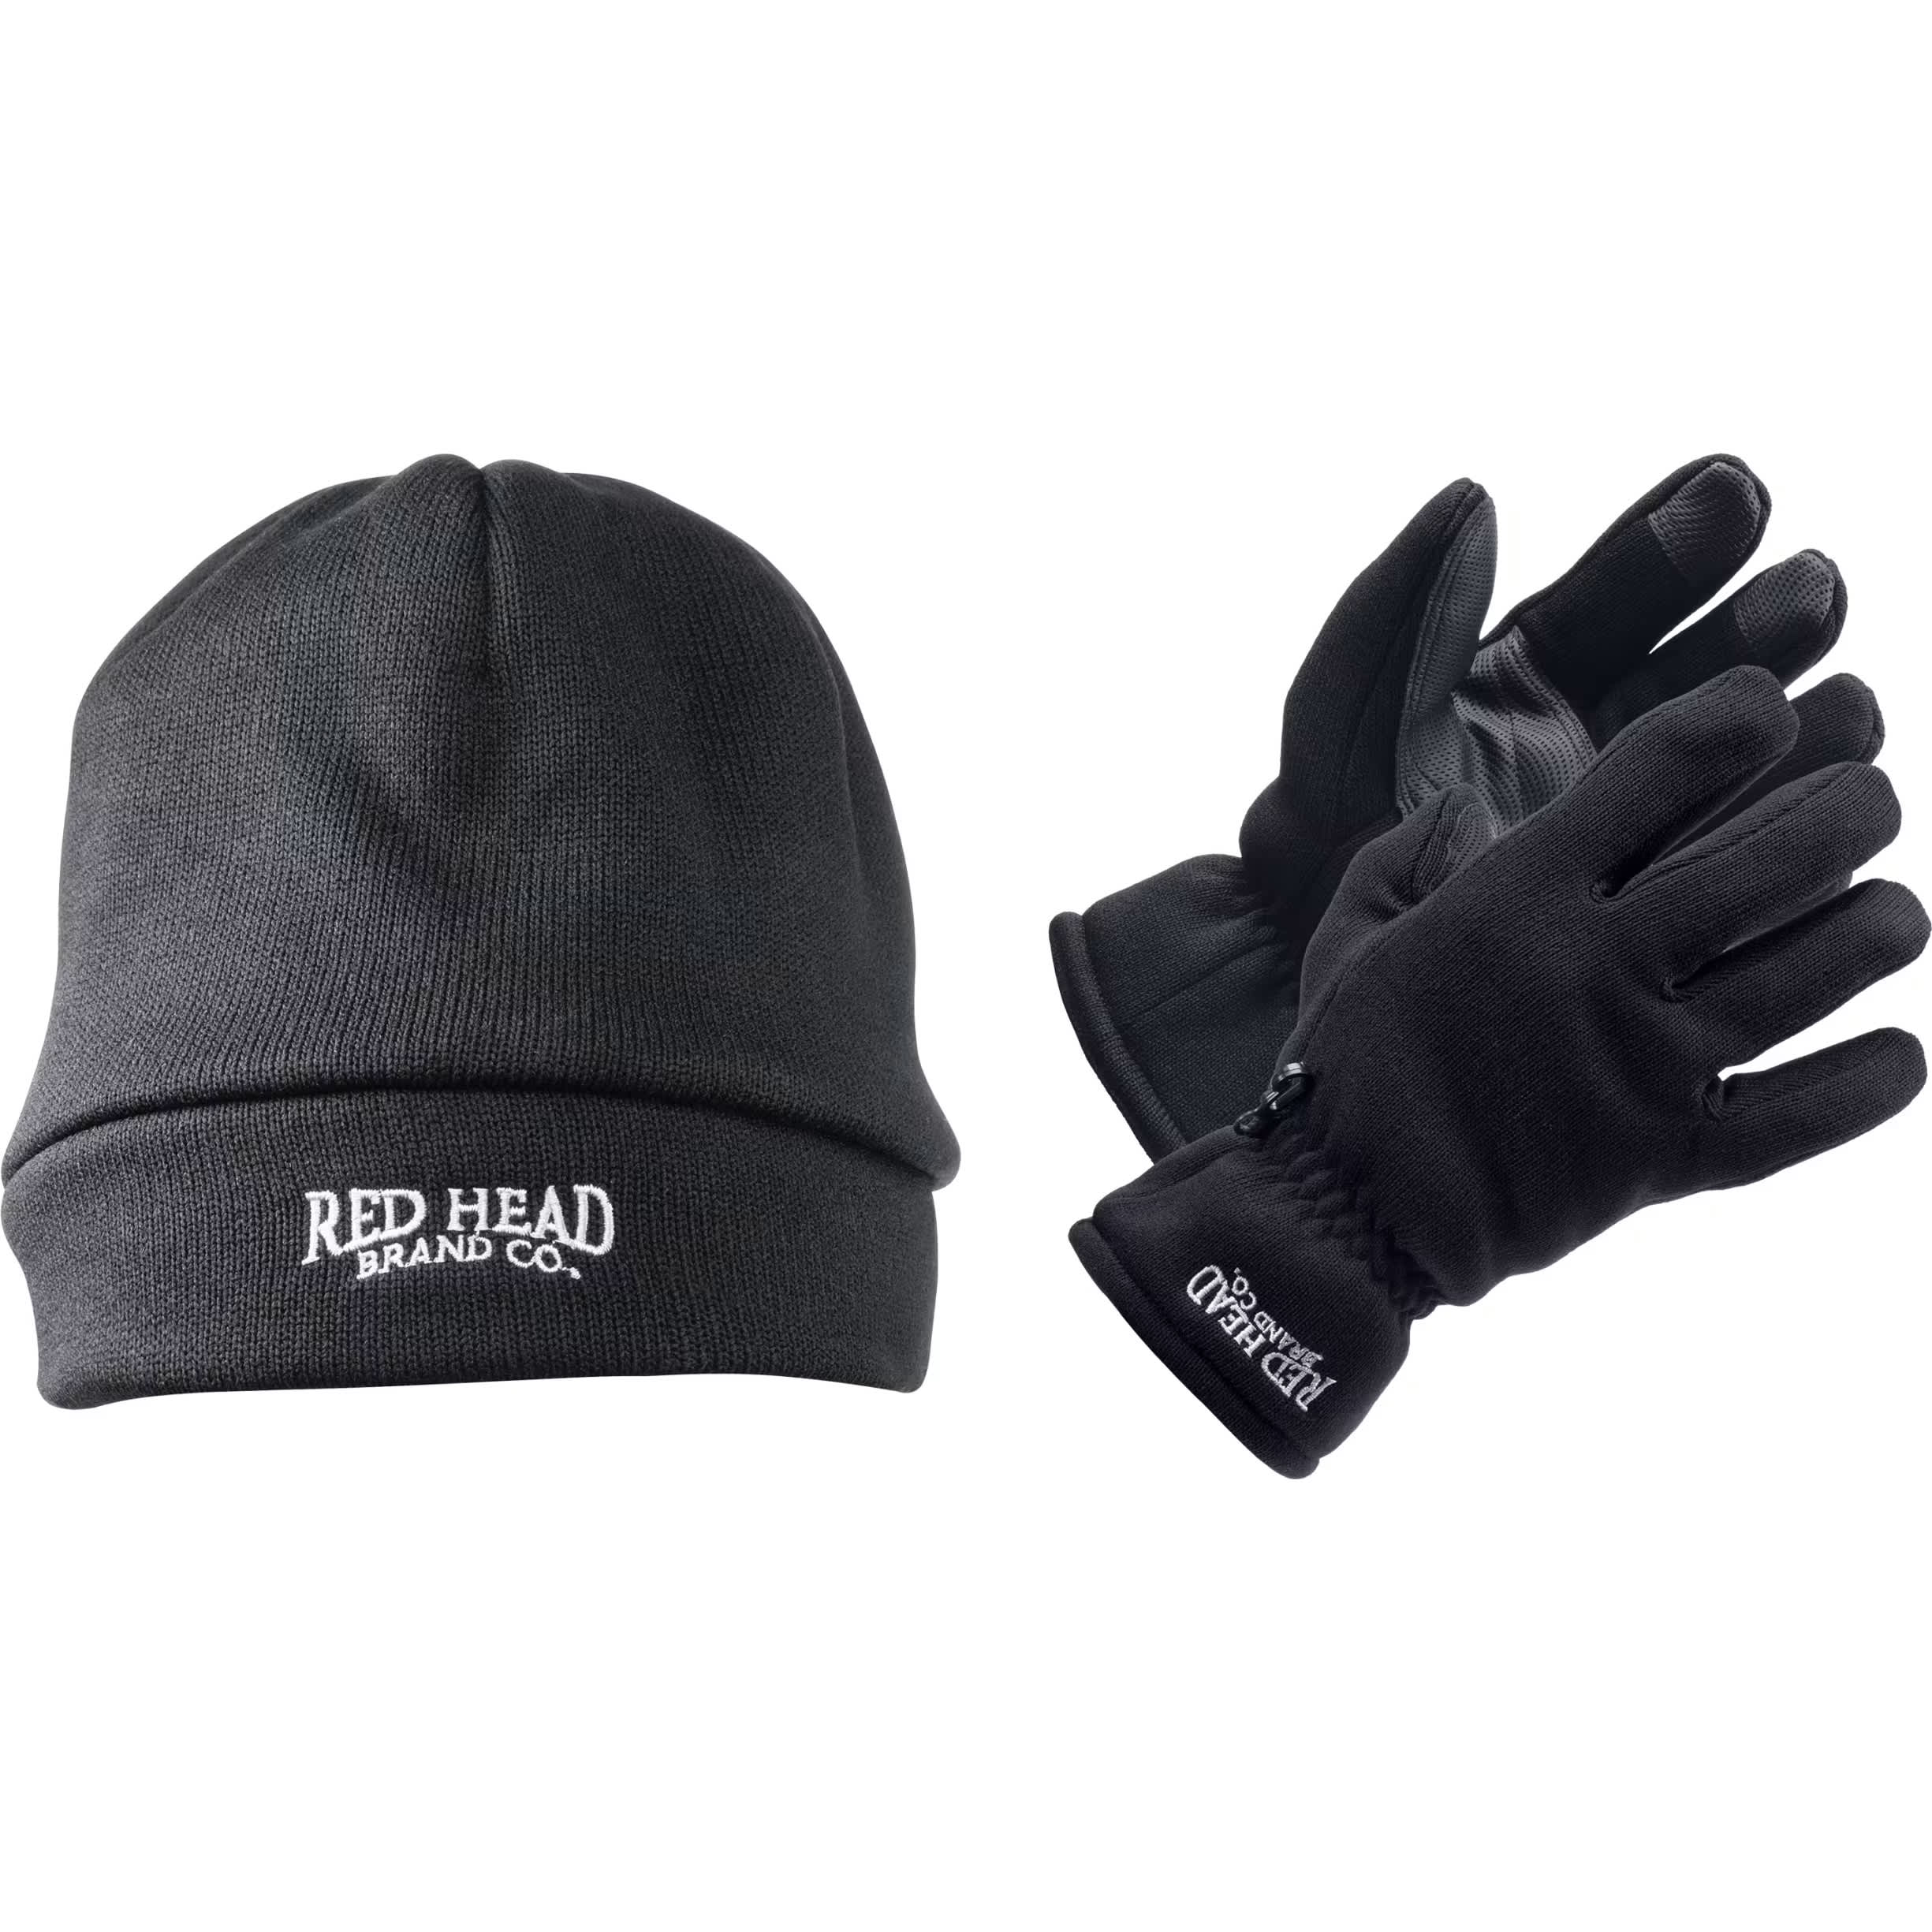 RedHead® Knit Beanie and Gloves Set